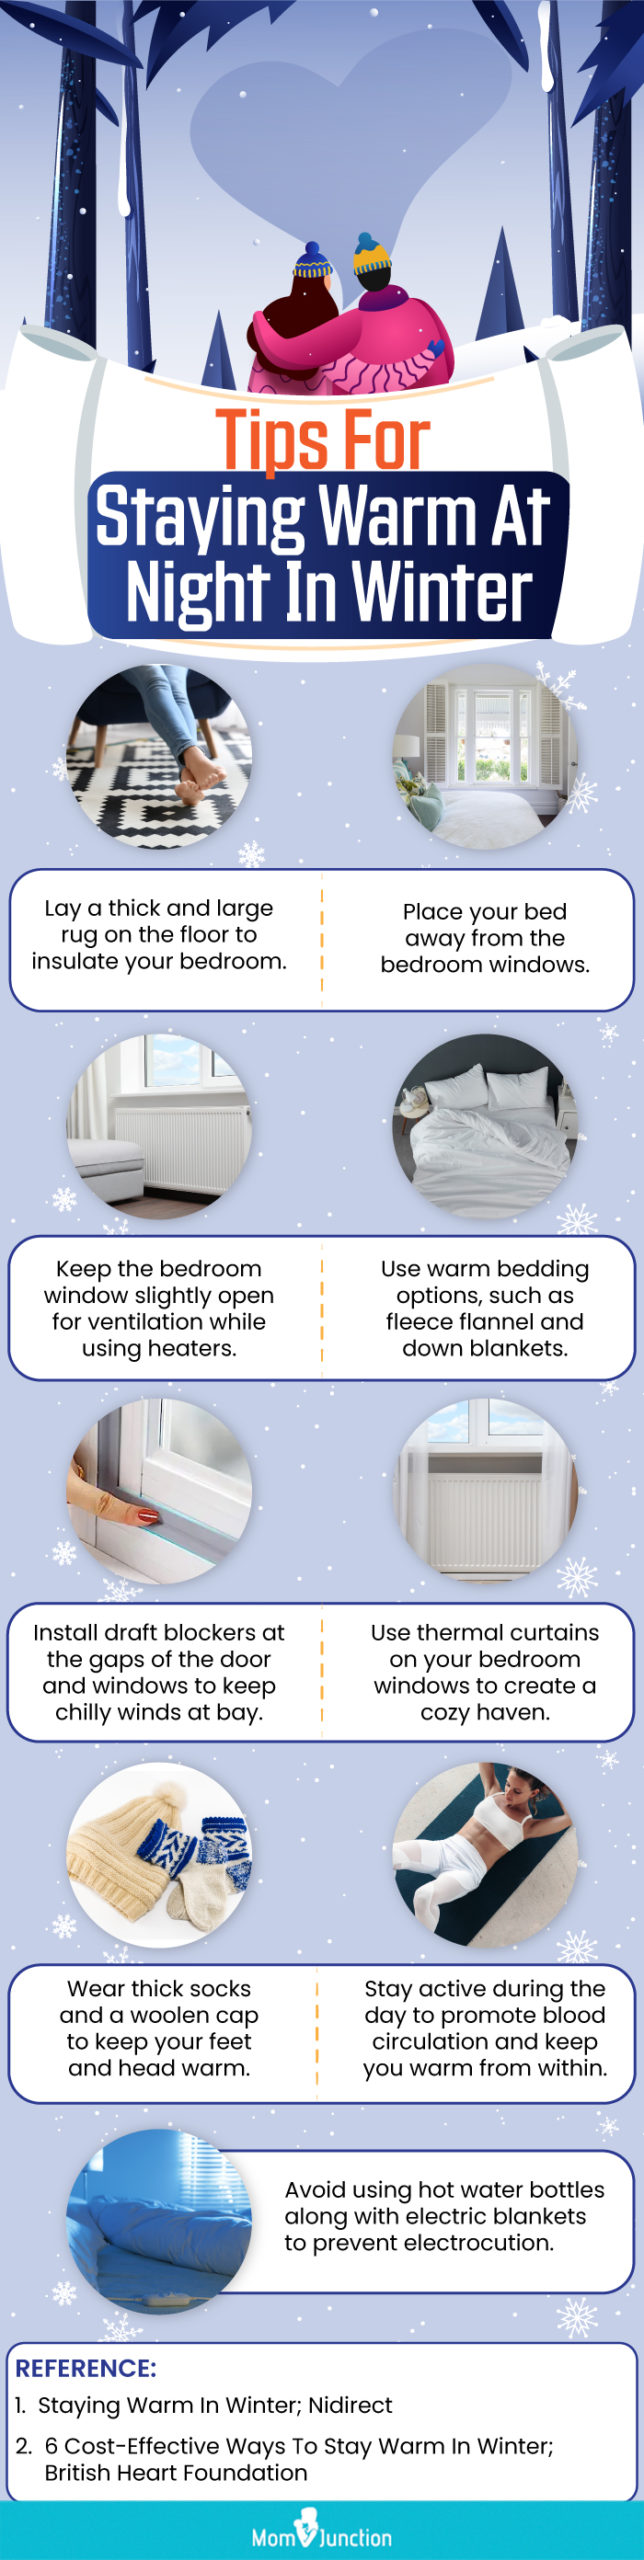 Tips For Staying Warm At Night In Winter (infographic)